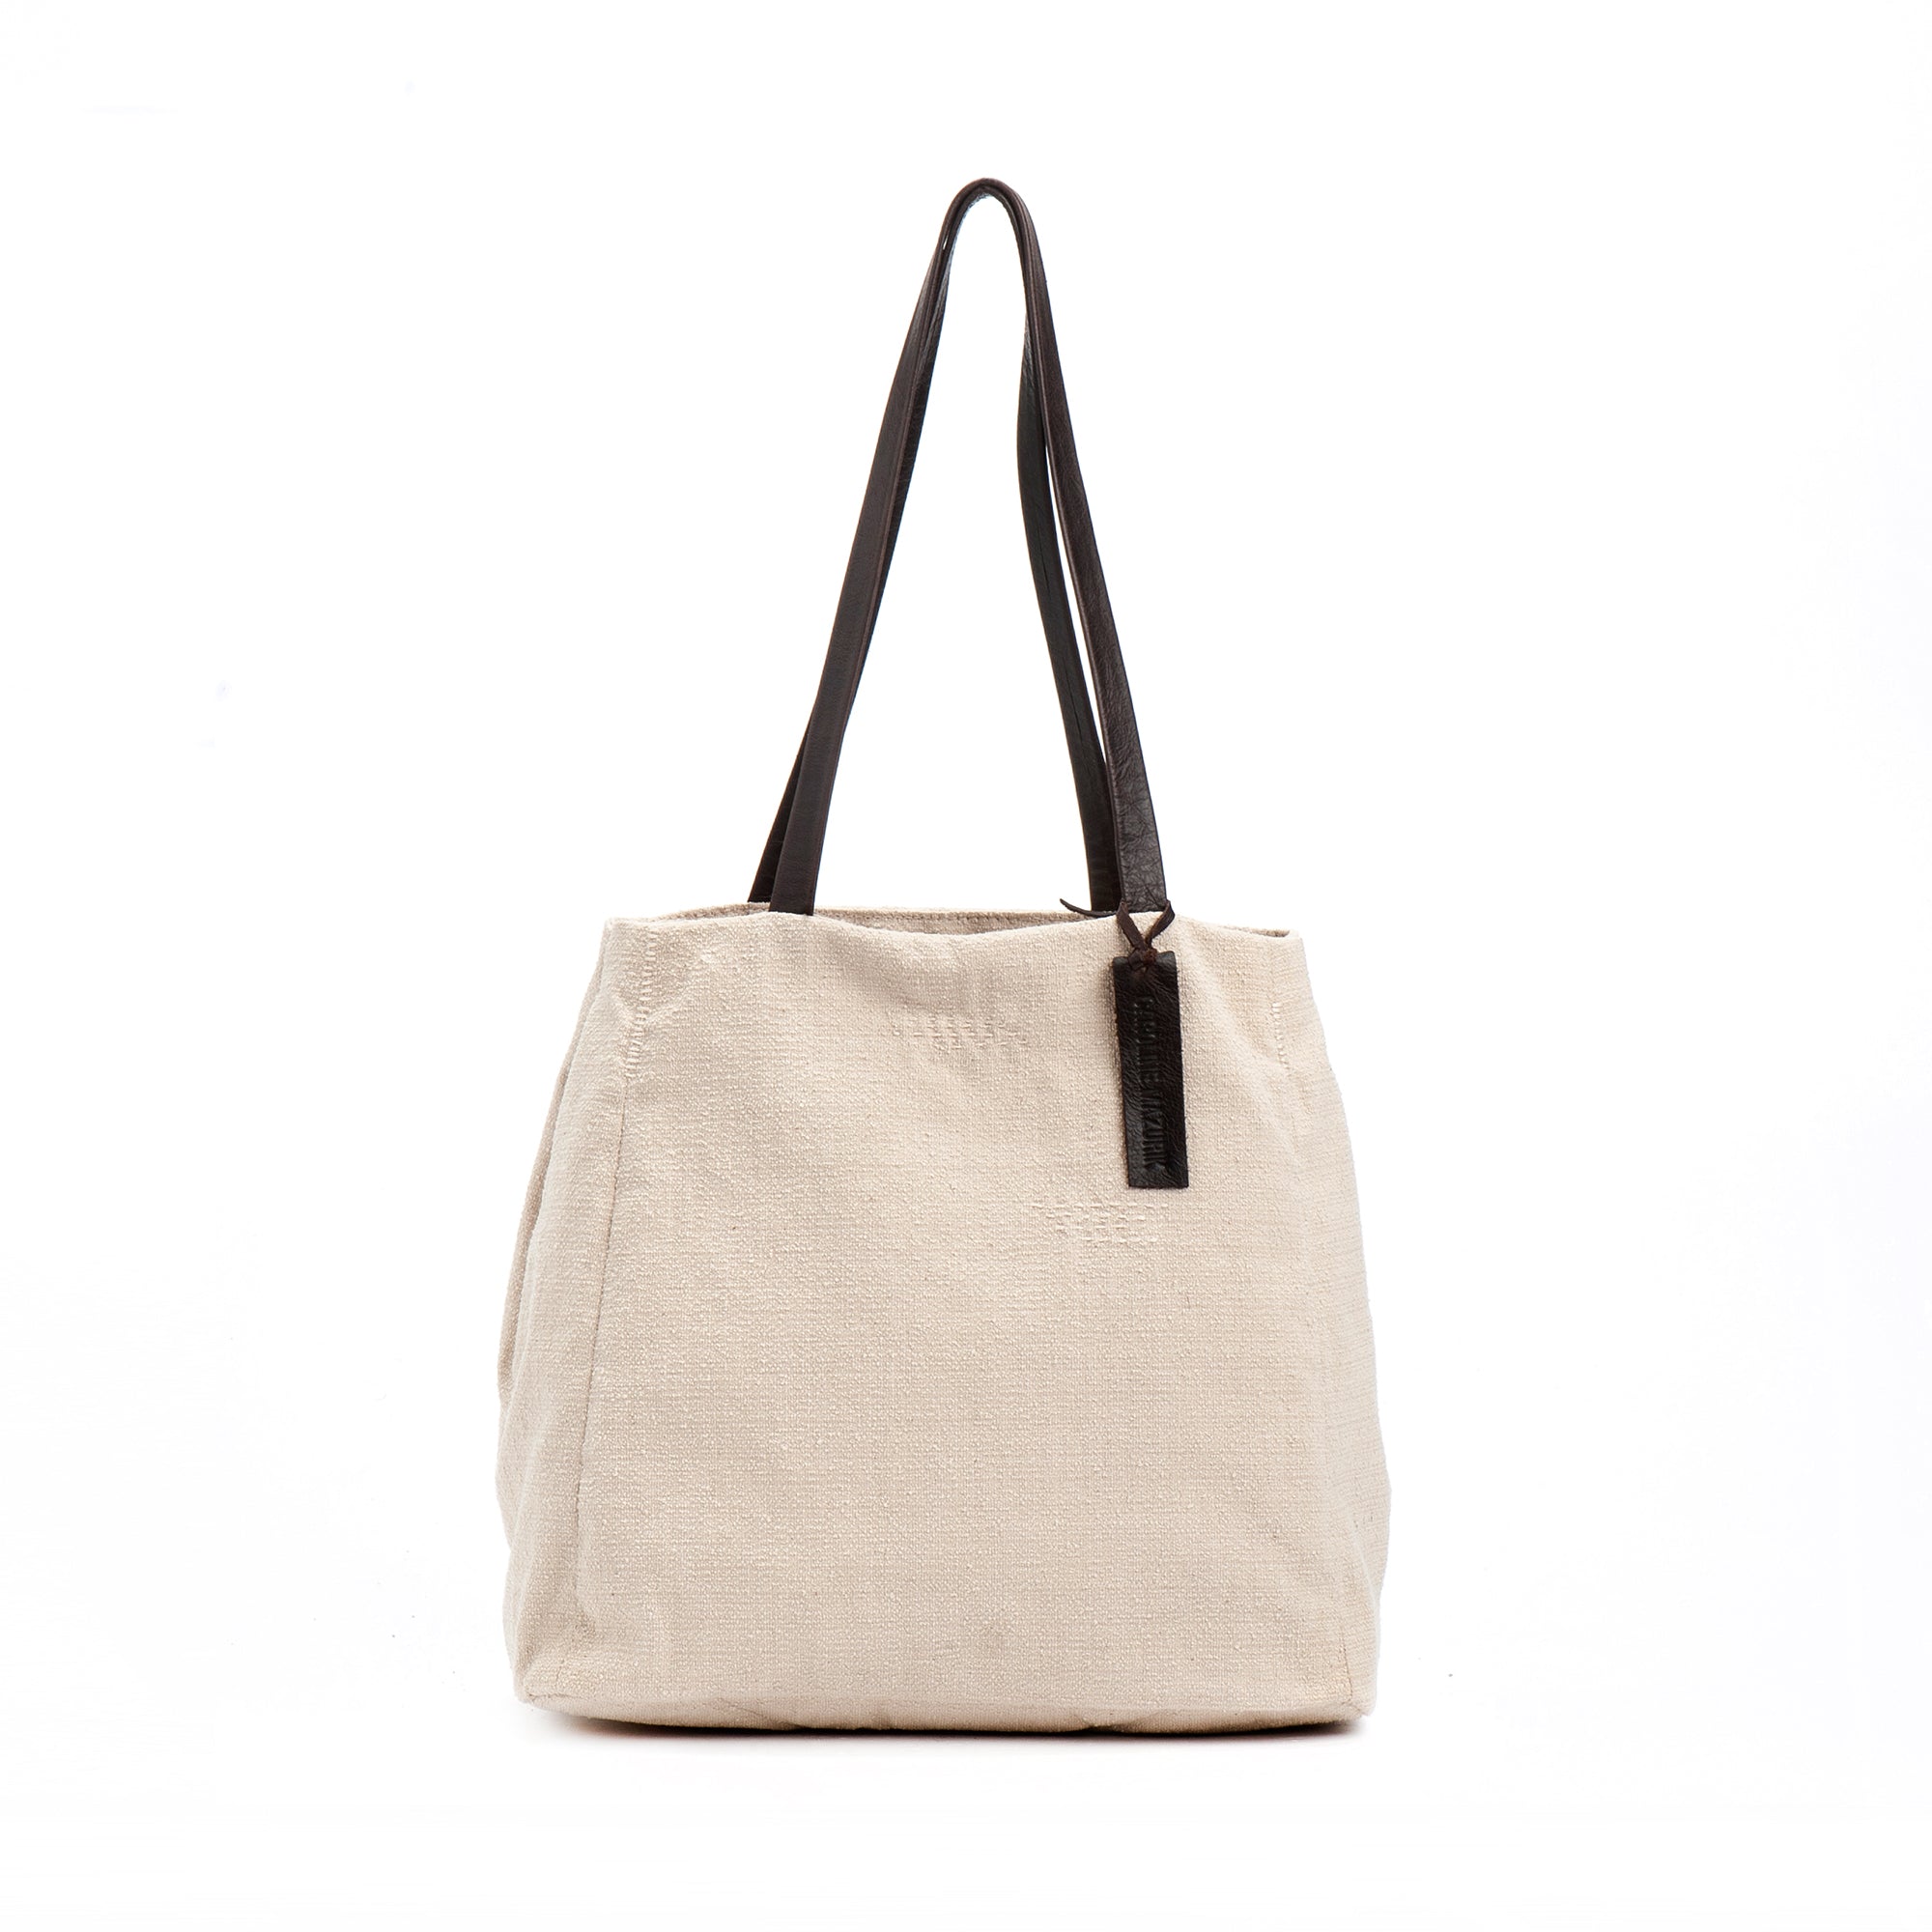 Cotton Tote with Leather handles Off-White Shoulder Woman handbag 